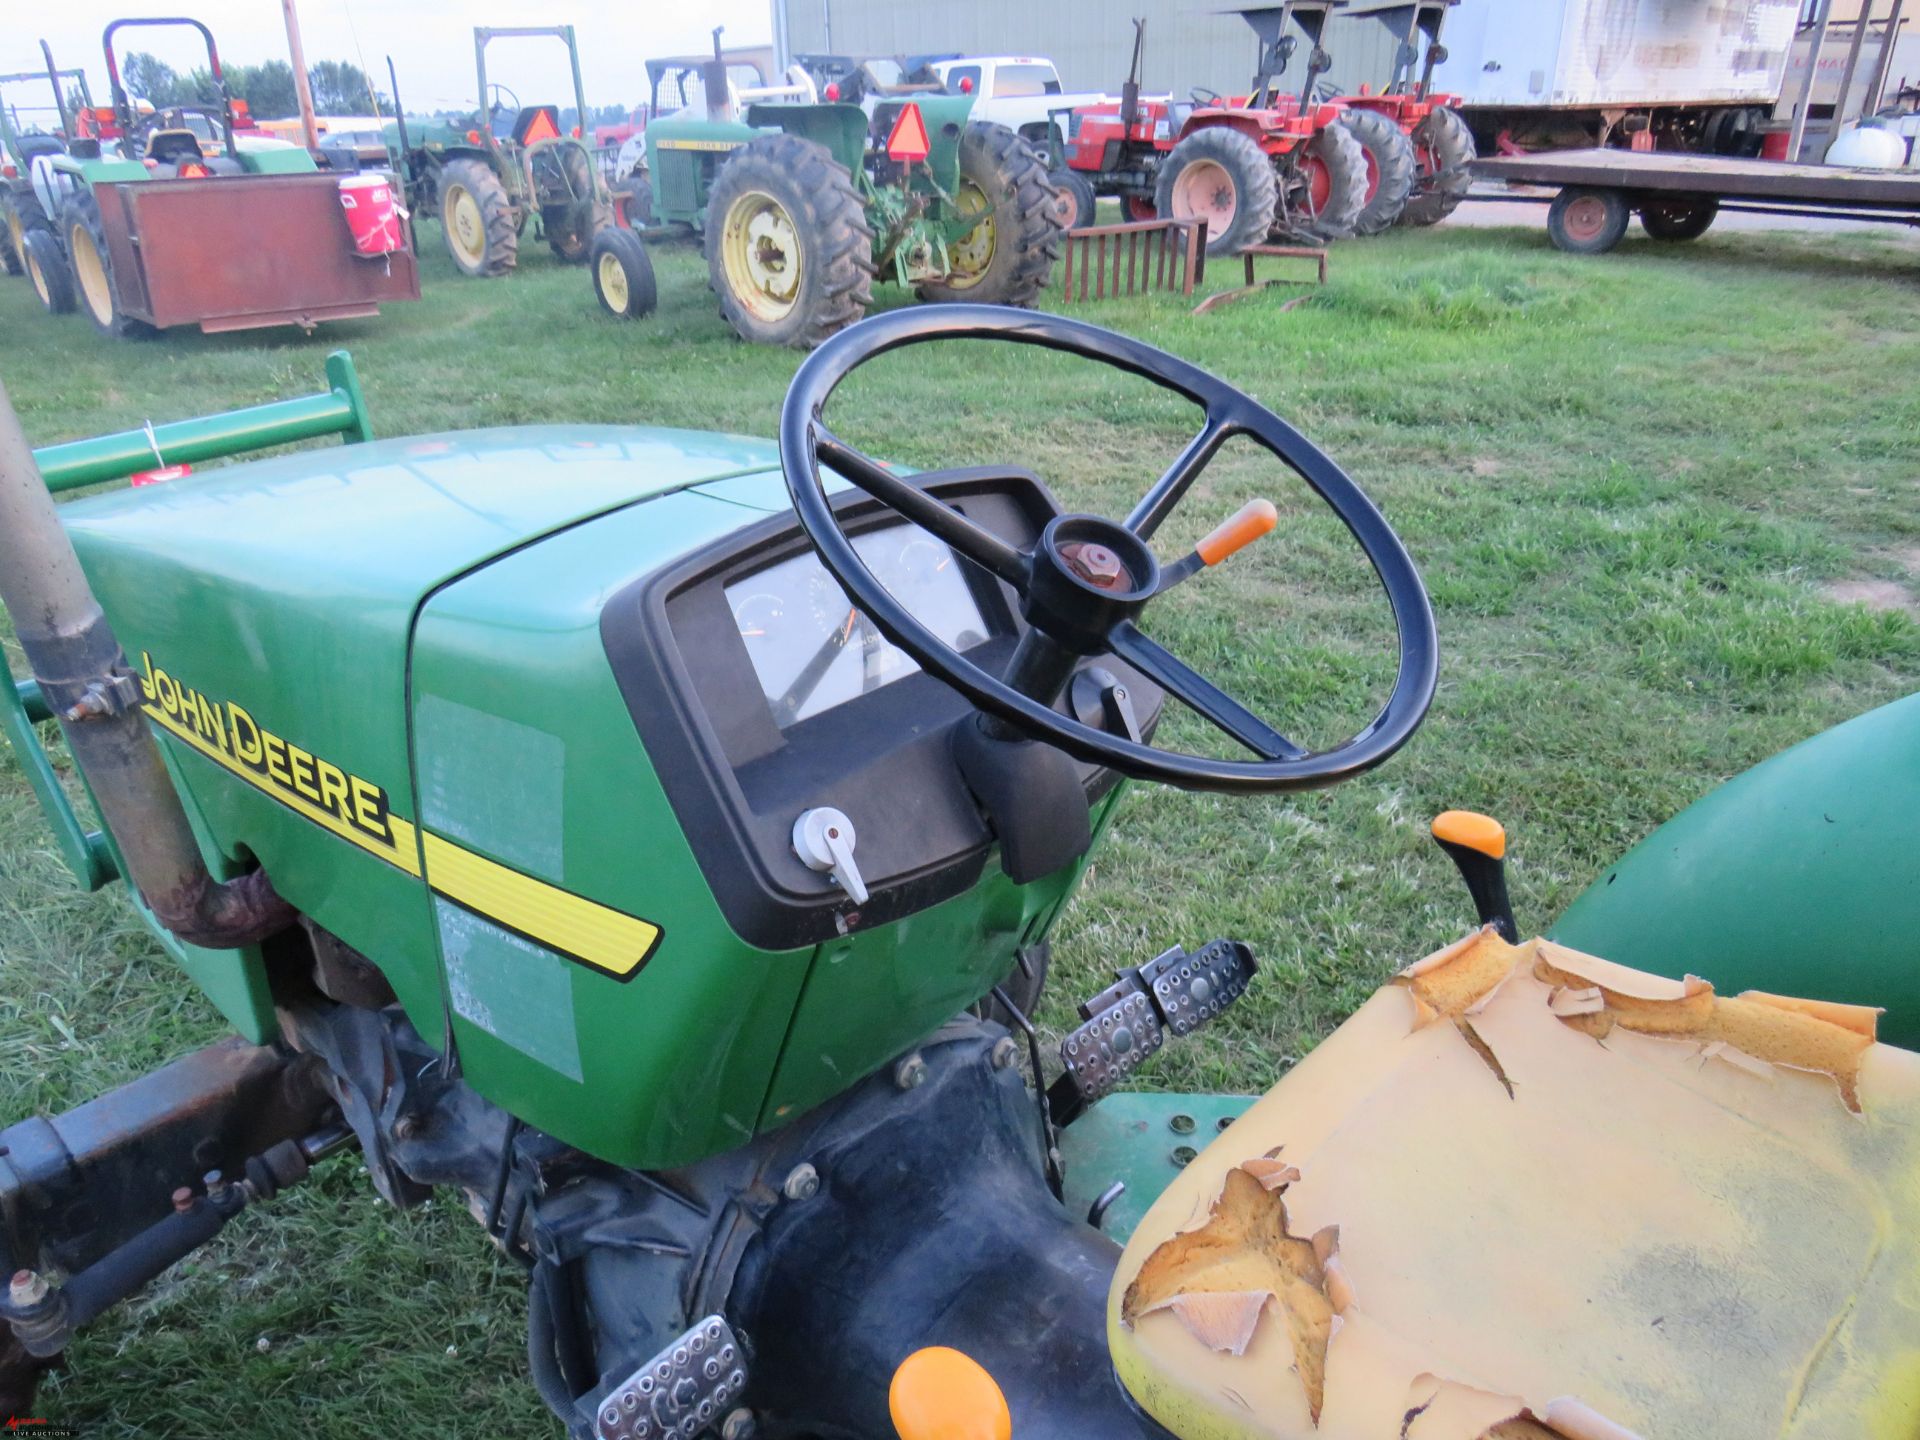 2004 JOHN DEERE 5105 TRACTOR, PTO, 16.9-28 REAR TIRES, 4178 HOURS SHOWING (HOURS SUBJECT TO CHANGE), - Image 7 of 7